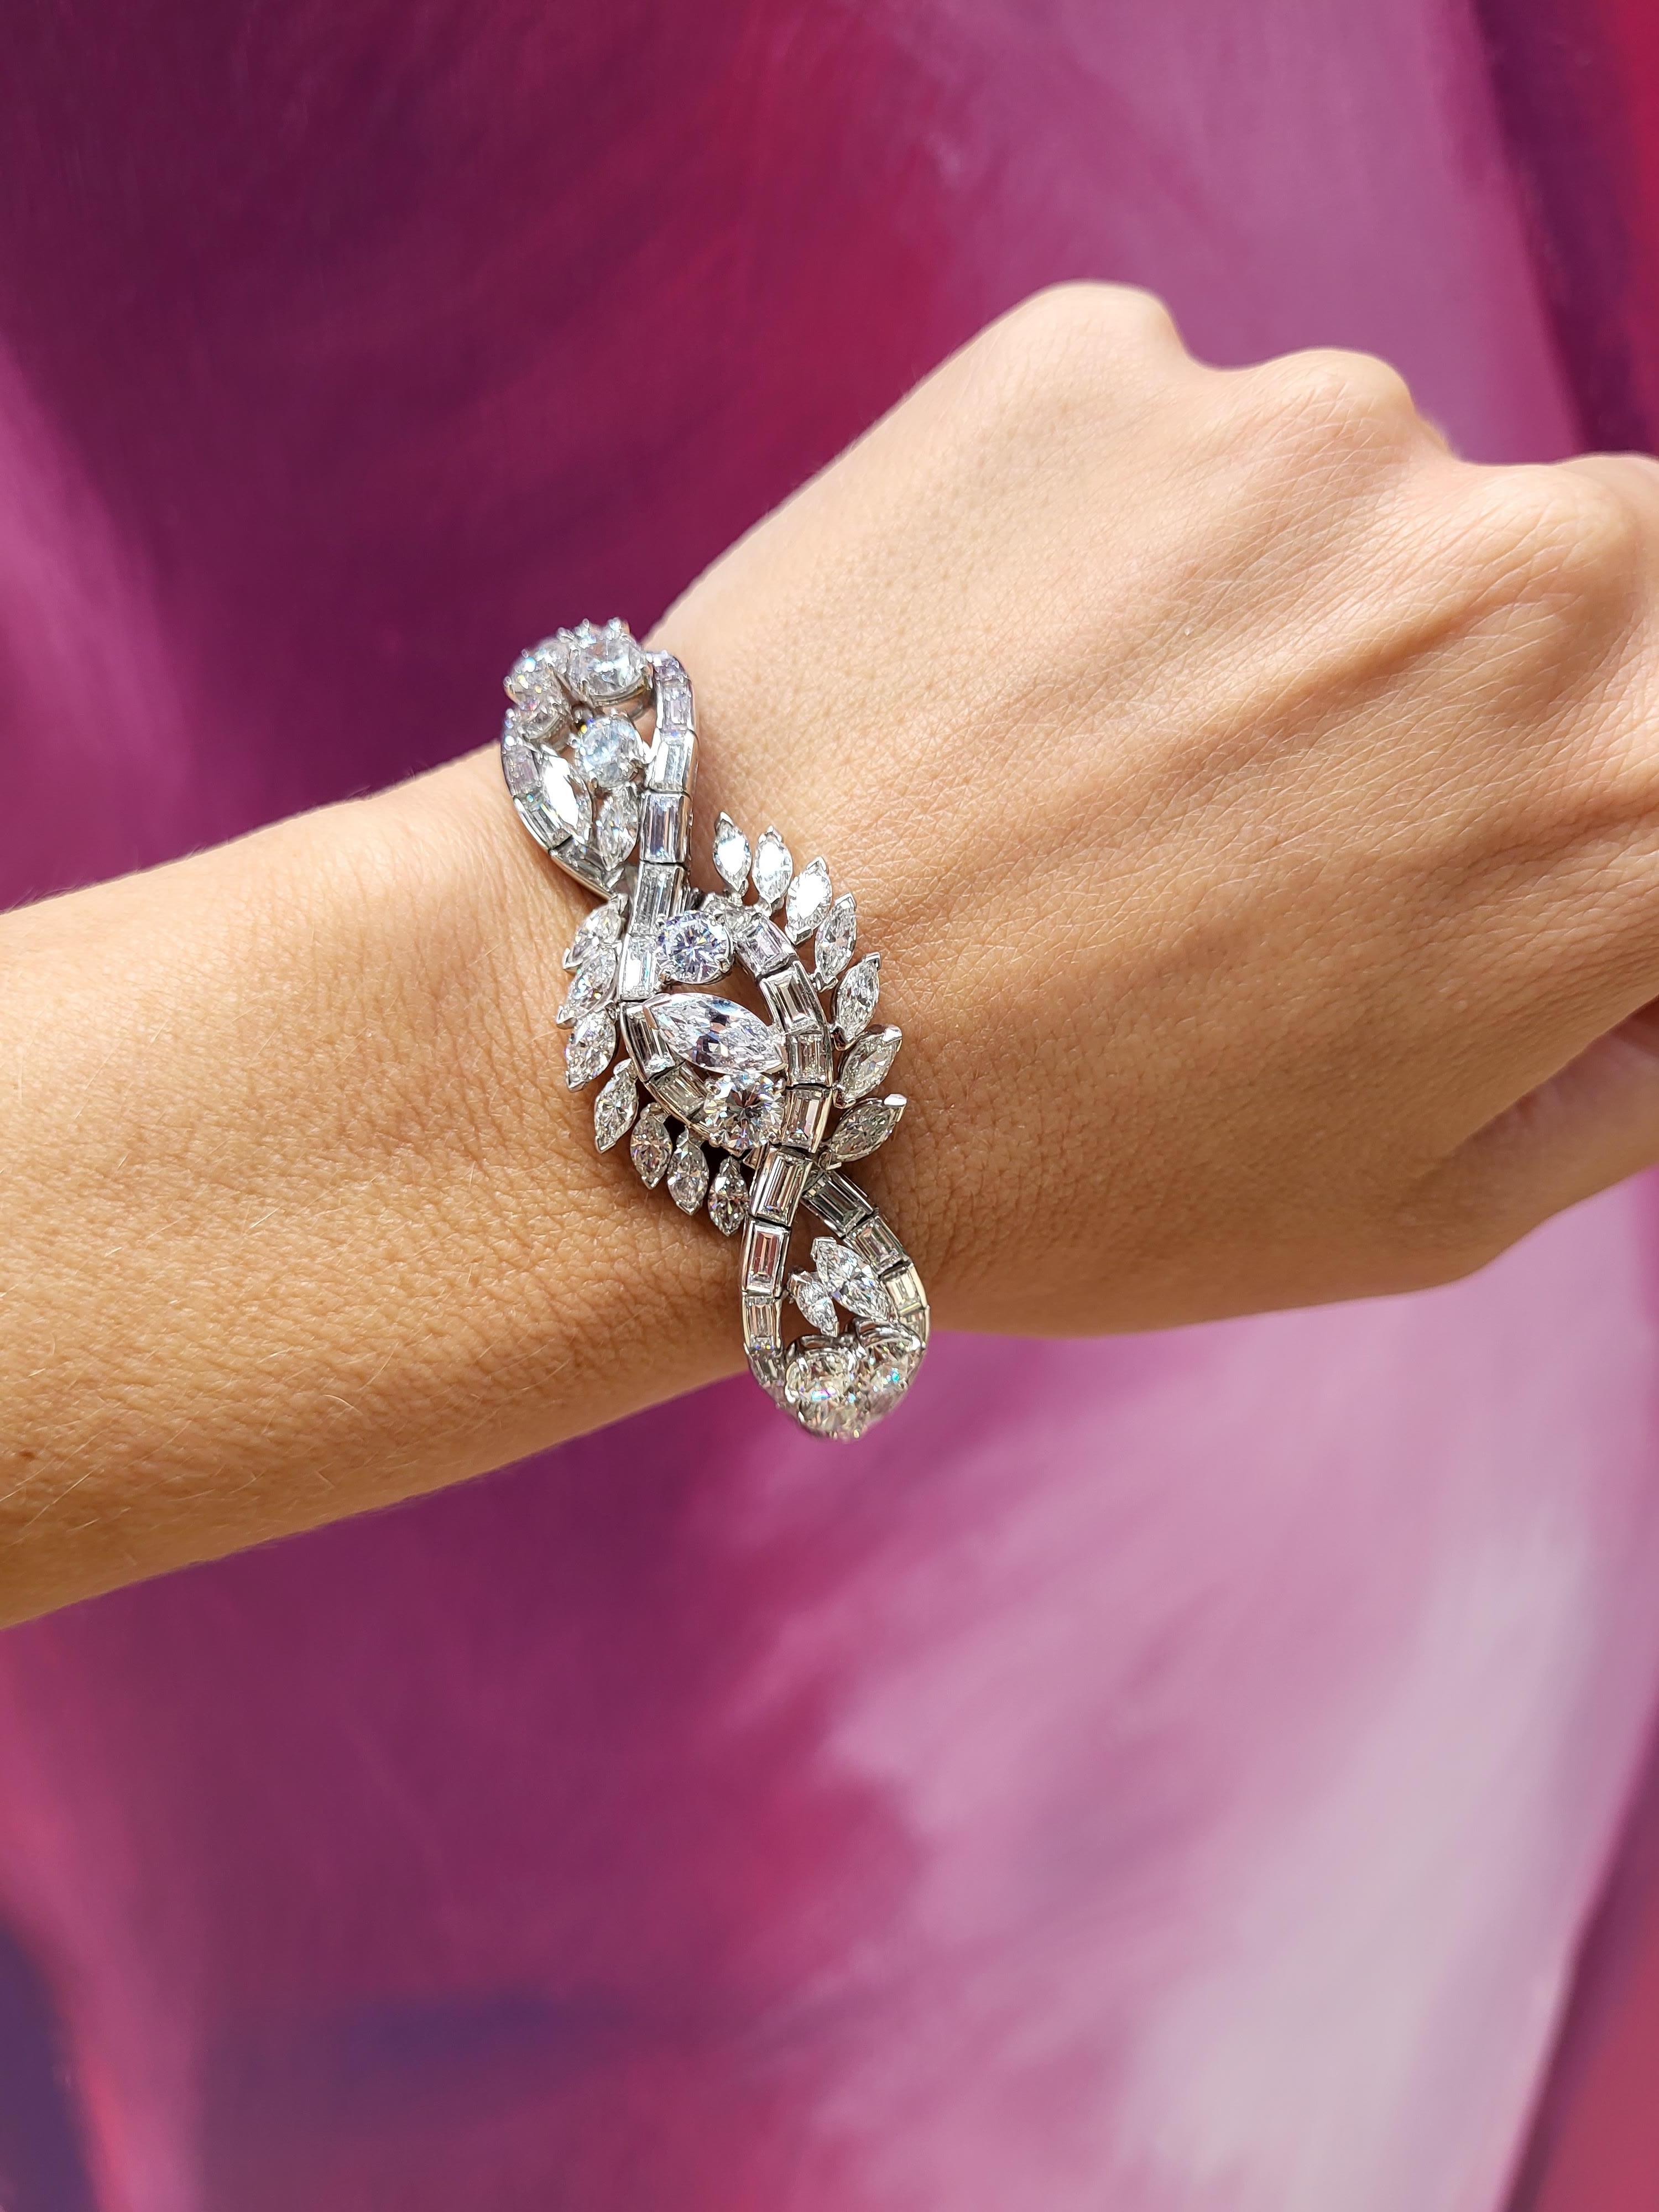 Edwardian Inspired Bracelet featuring 25.54 Carat Total Weight in Diamonds  For Sale 1